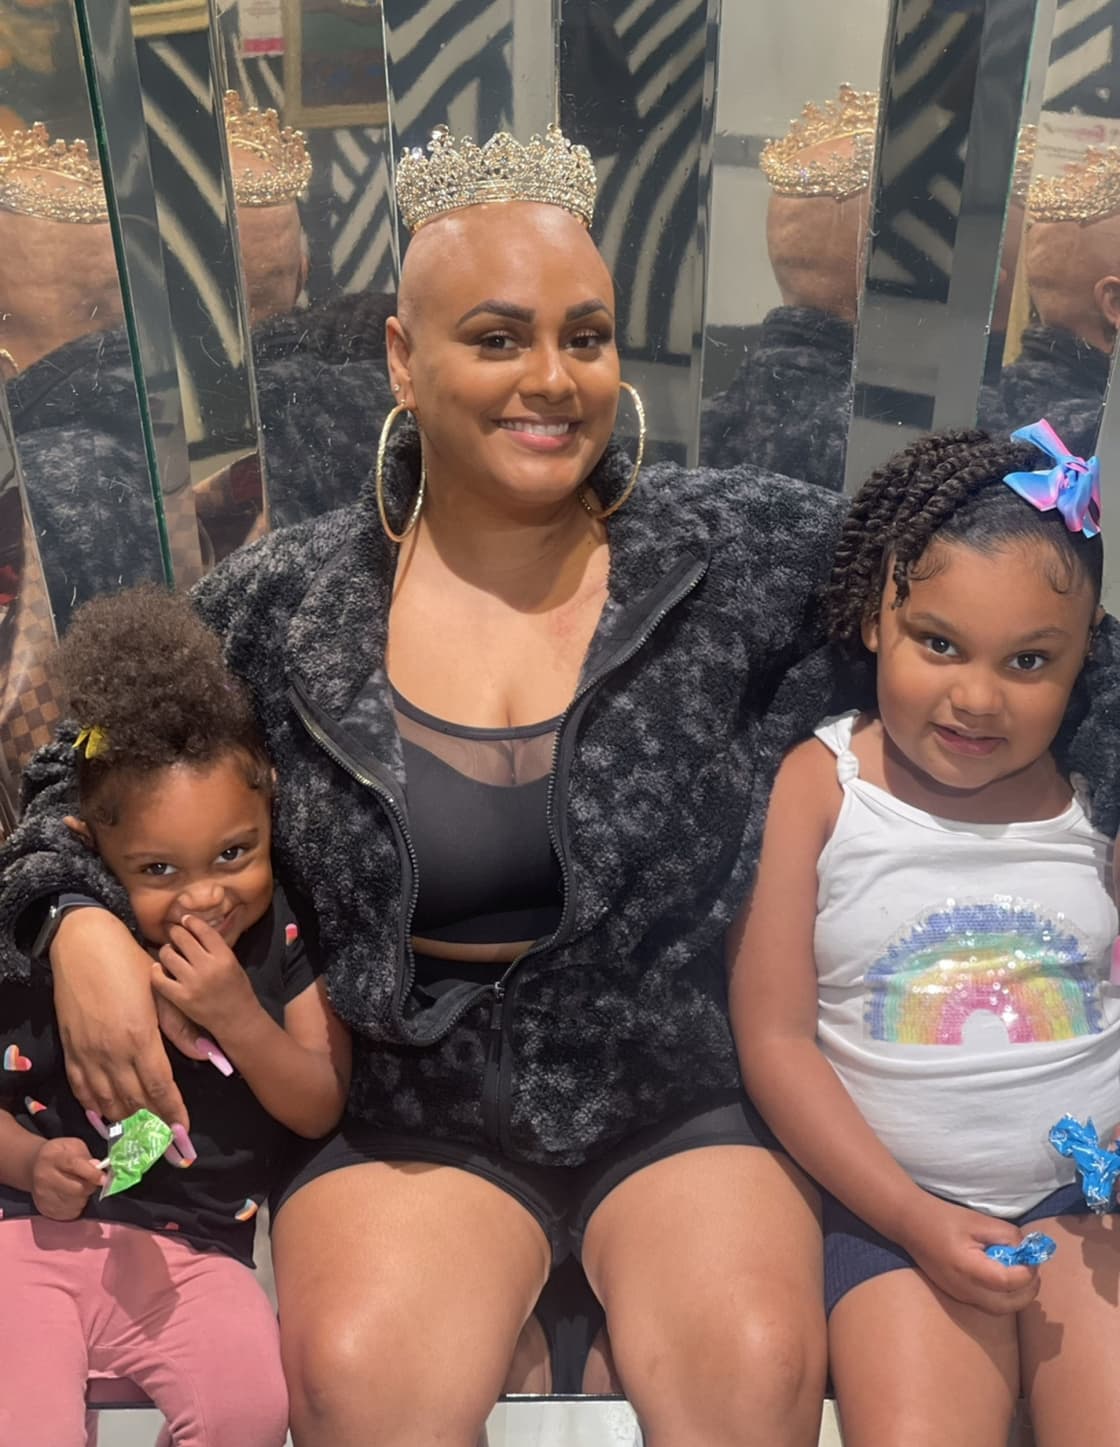 Black mom, 33, was diagnosed with aggressive breast cancer. A clinical trial ‘saved her life’